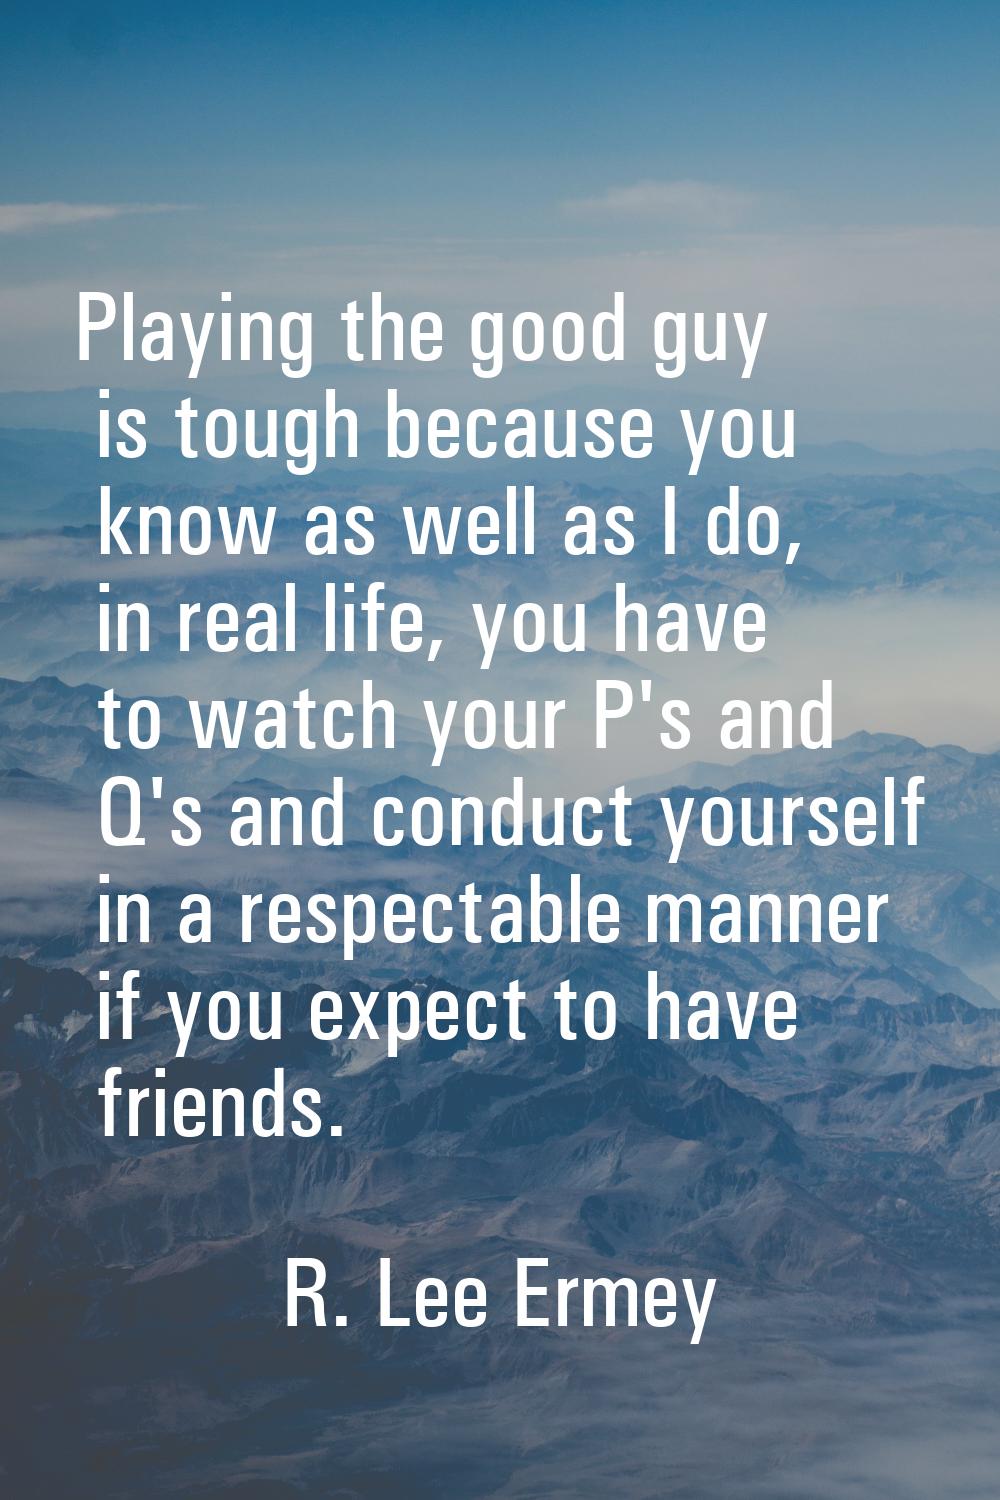 Playing the good guy is tough because you know as well as I do, in real life, you have to watch you